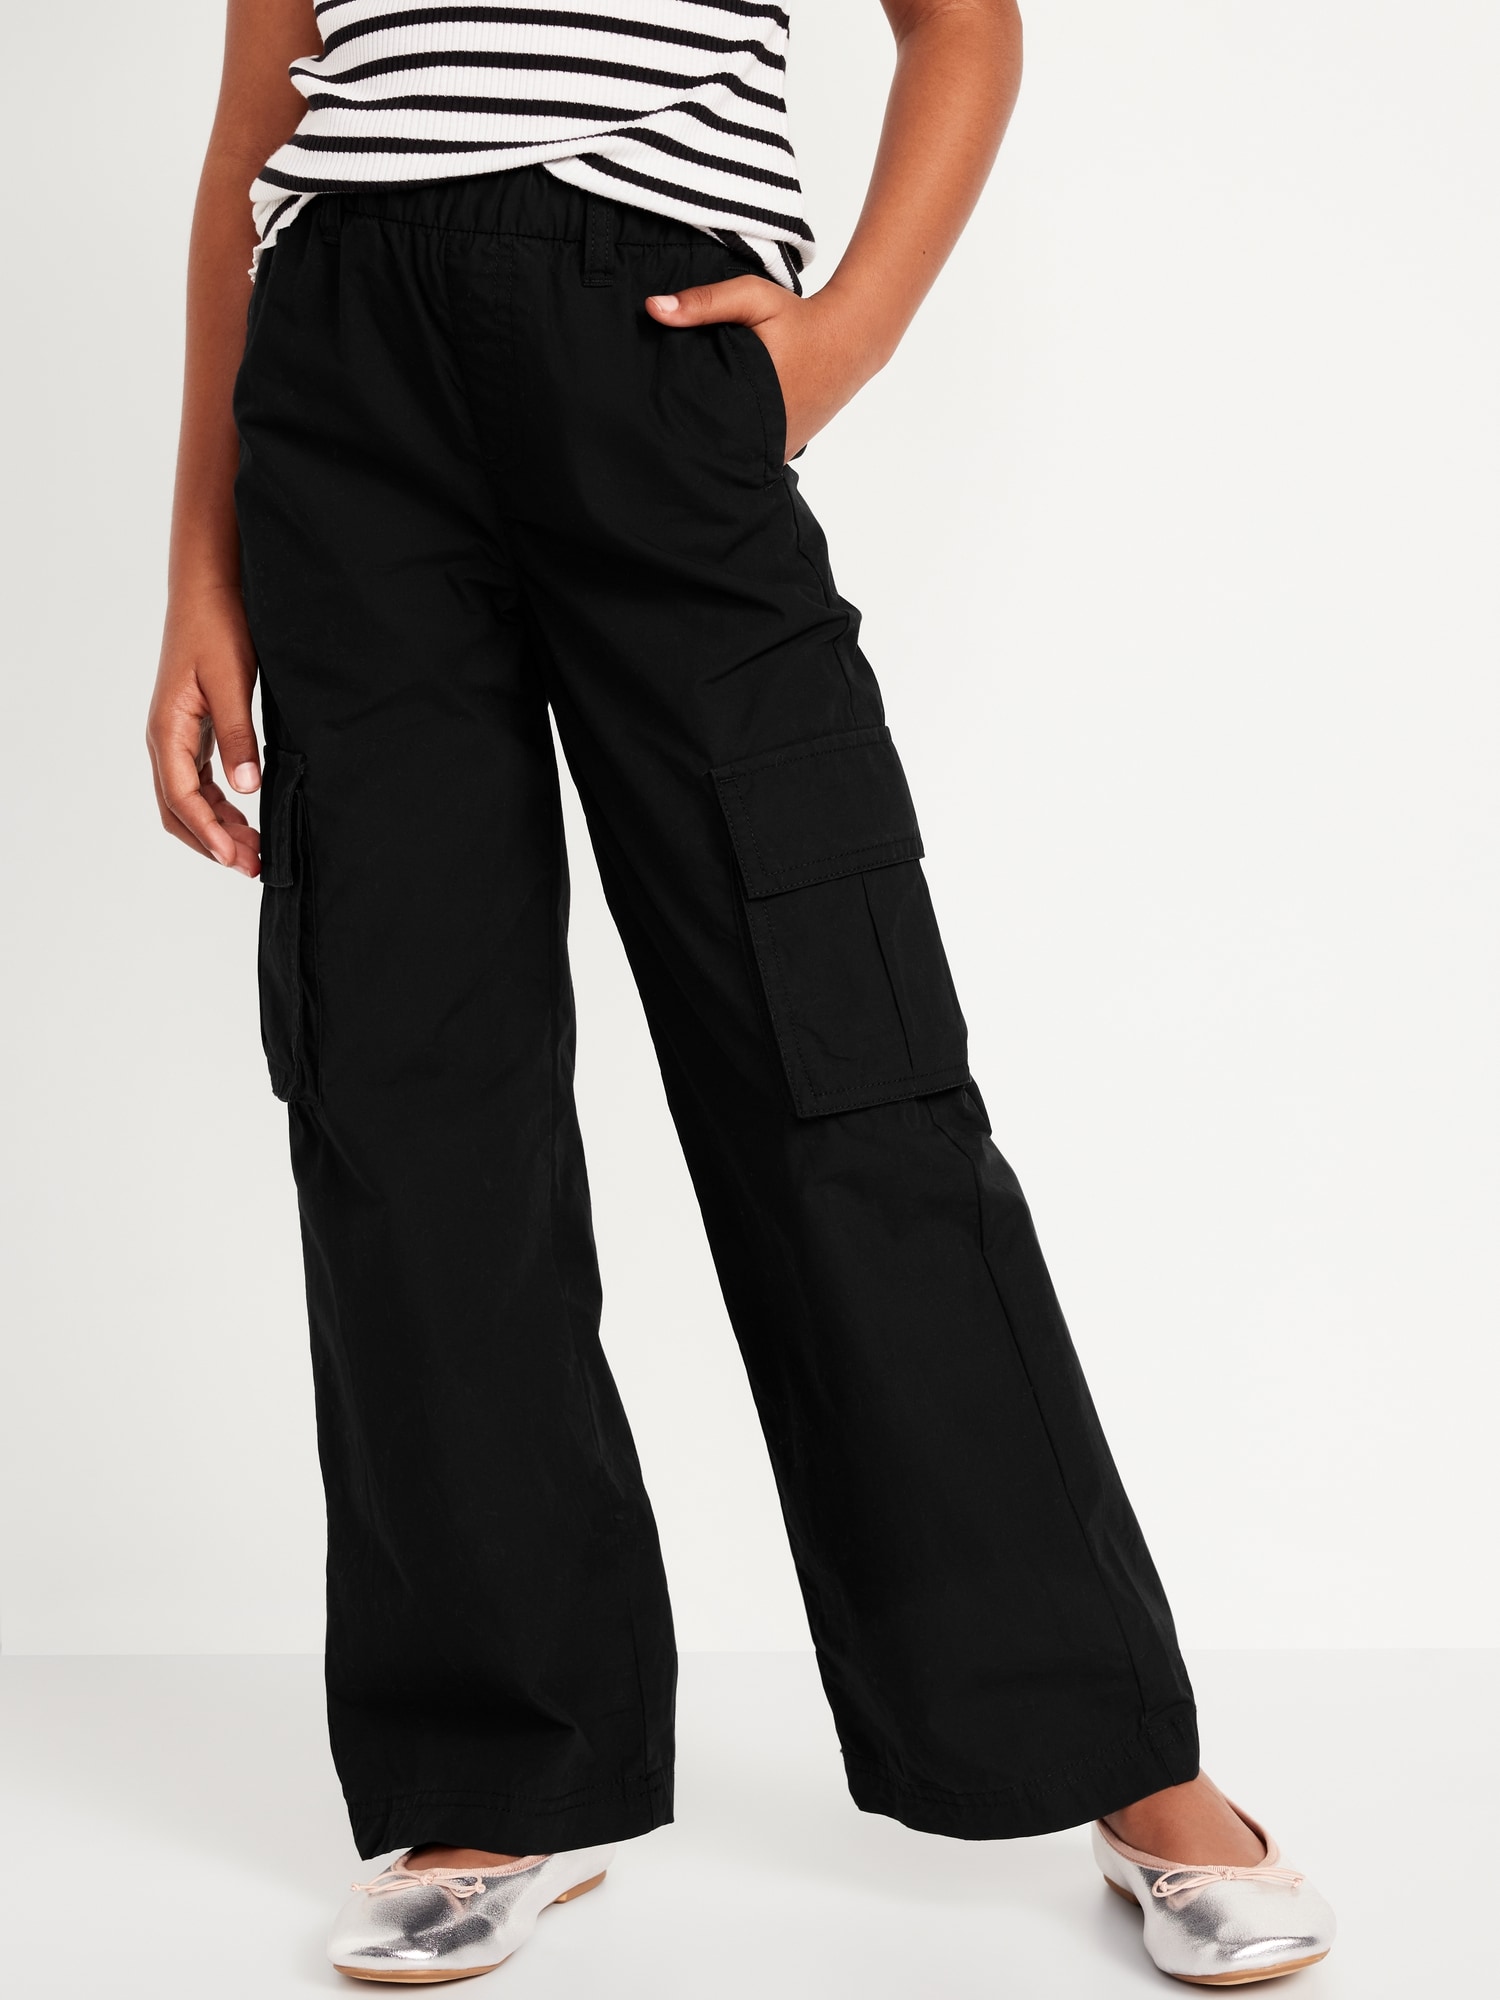 Womens Pants with Pockets